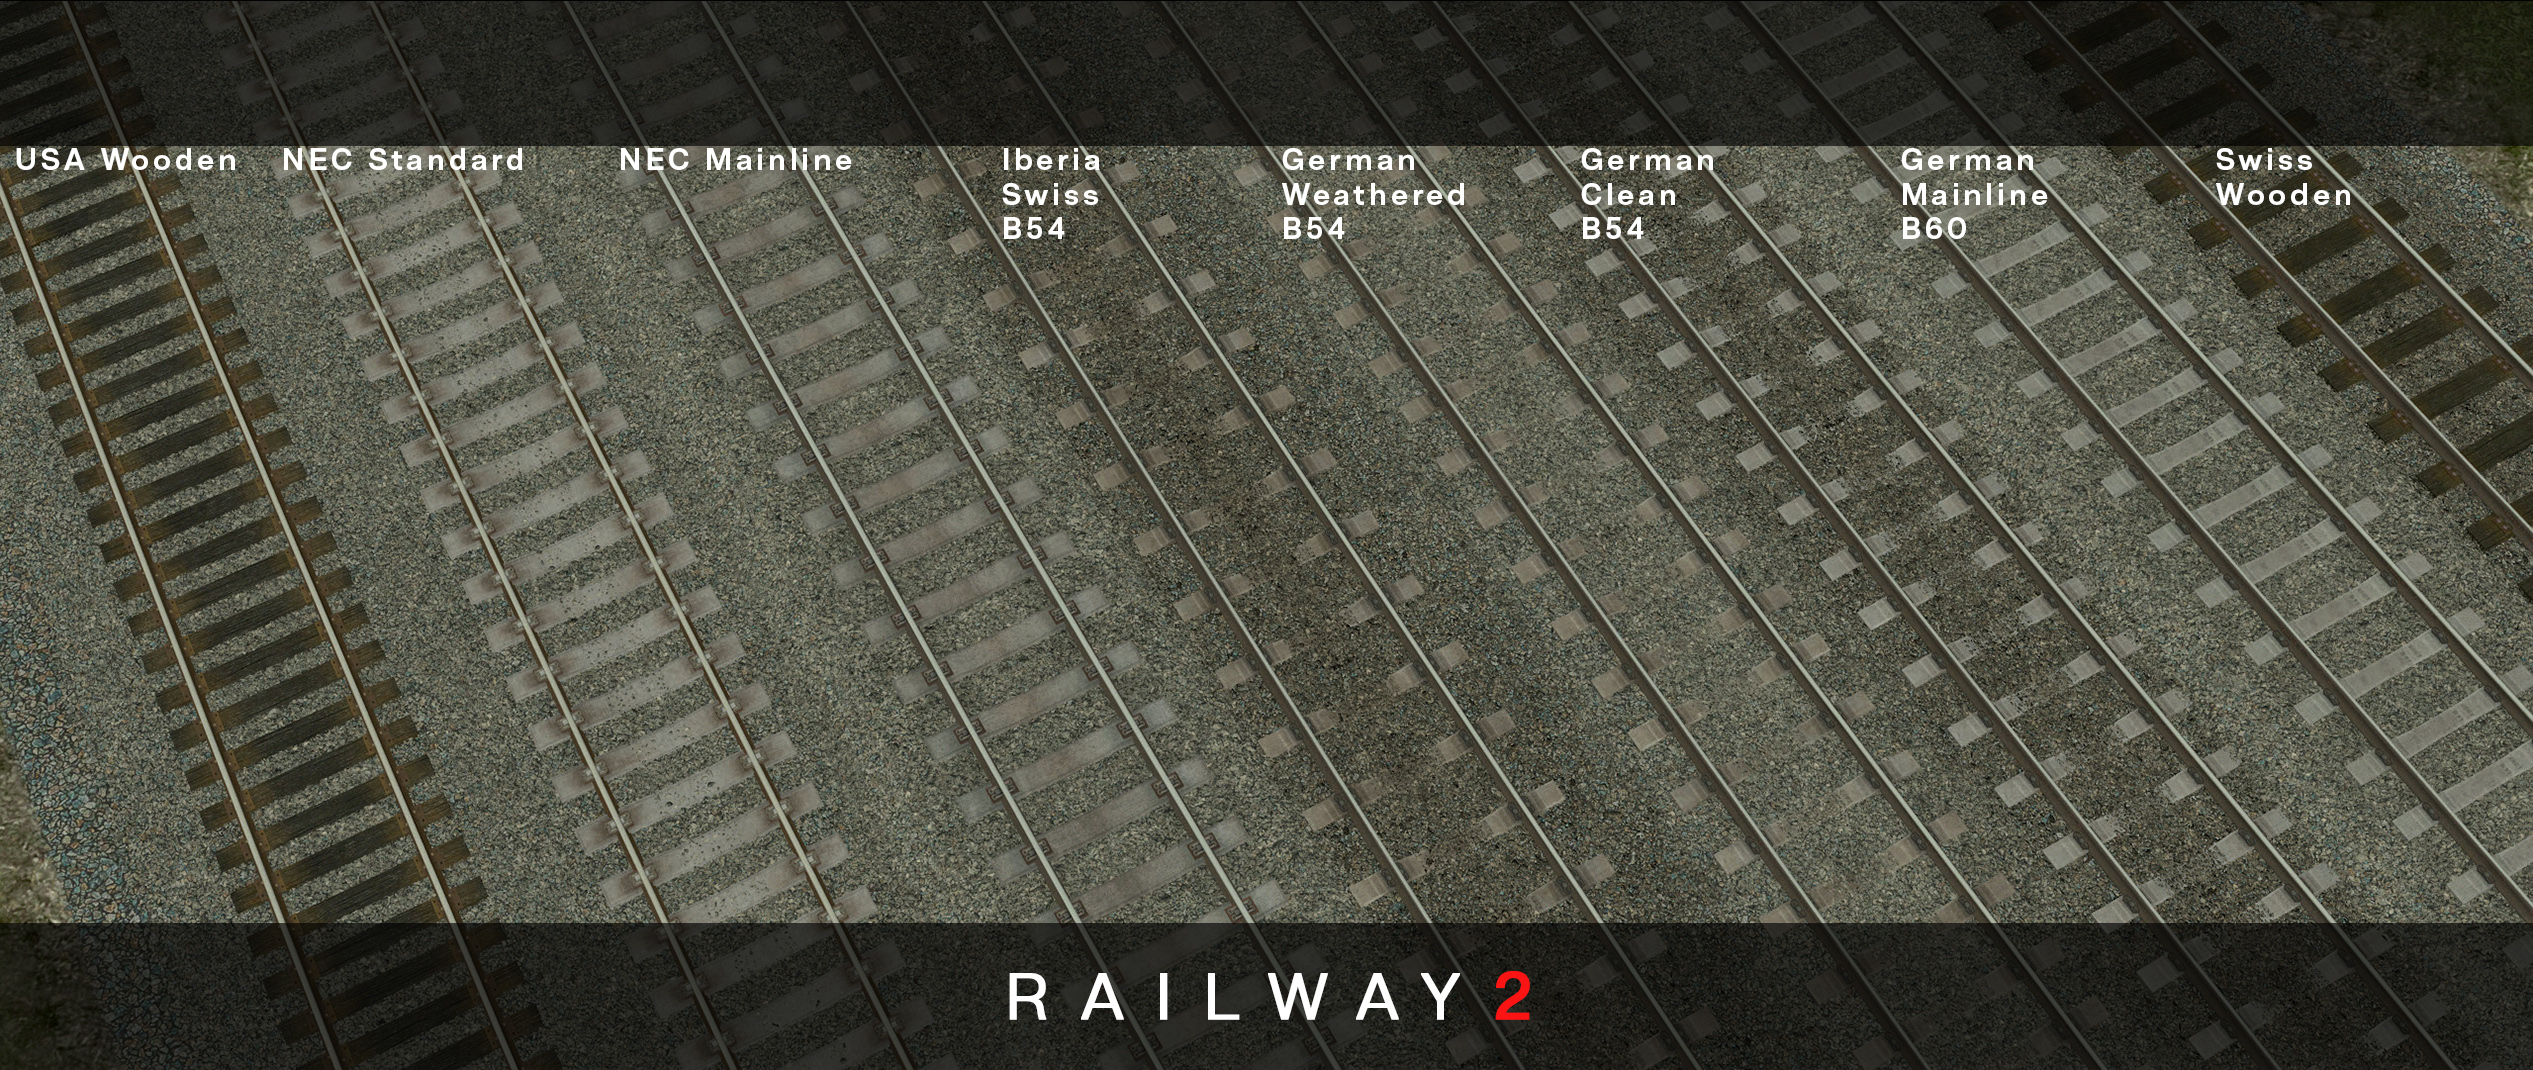 Cities: Skylines Useful Tips for Building Railways + Mods - 3.1. Networks - 47A1222